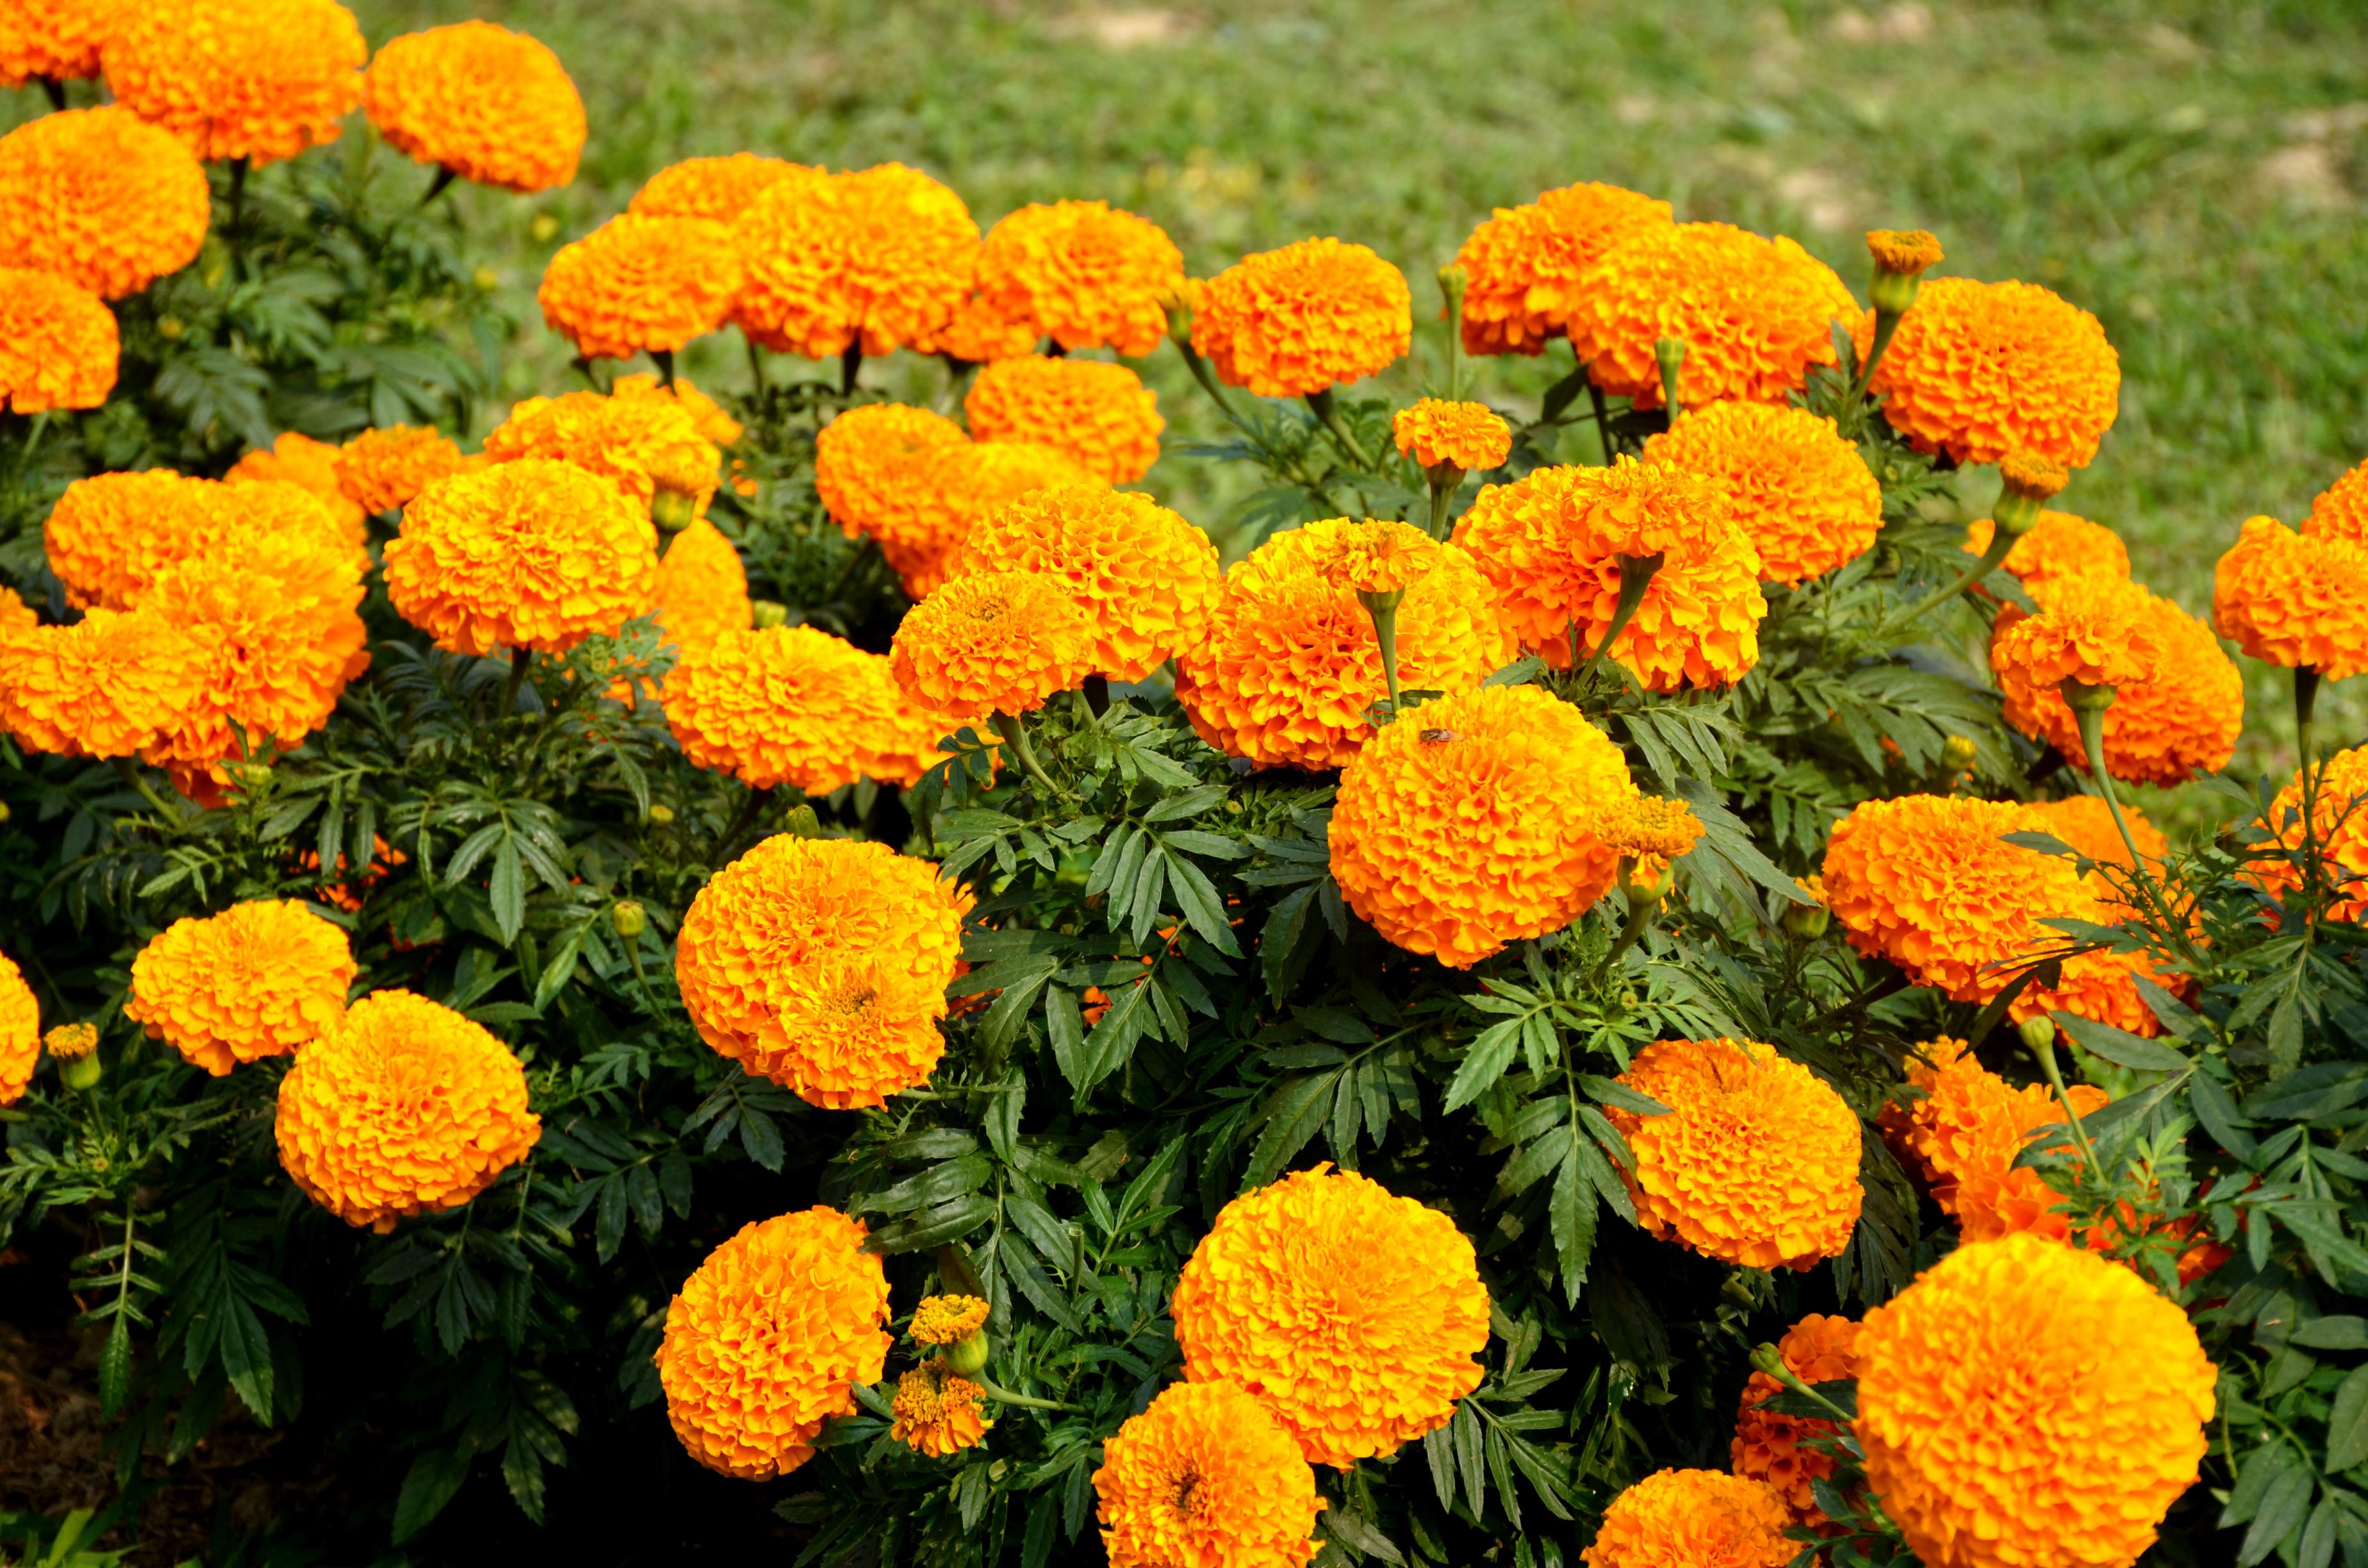 Flowers in BPATC campus